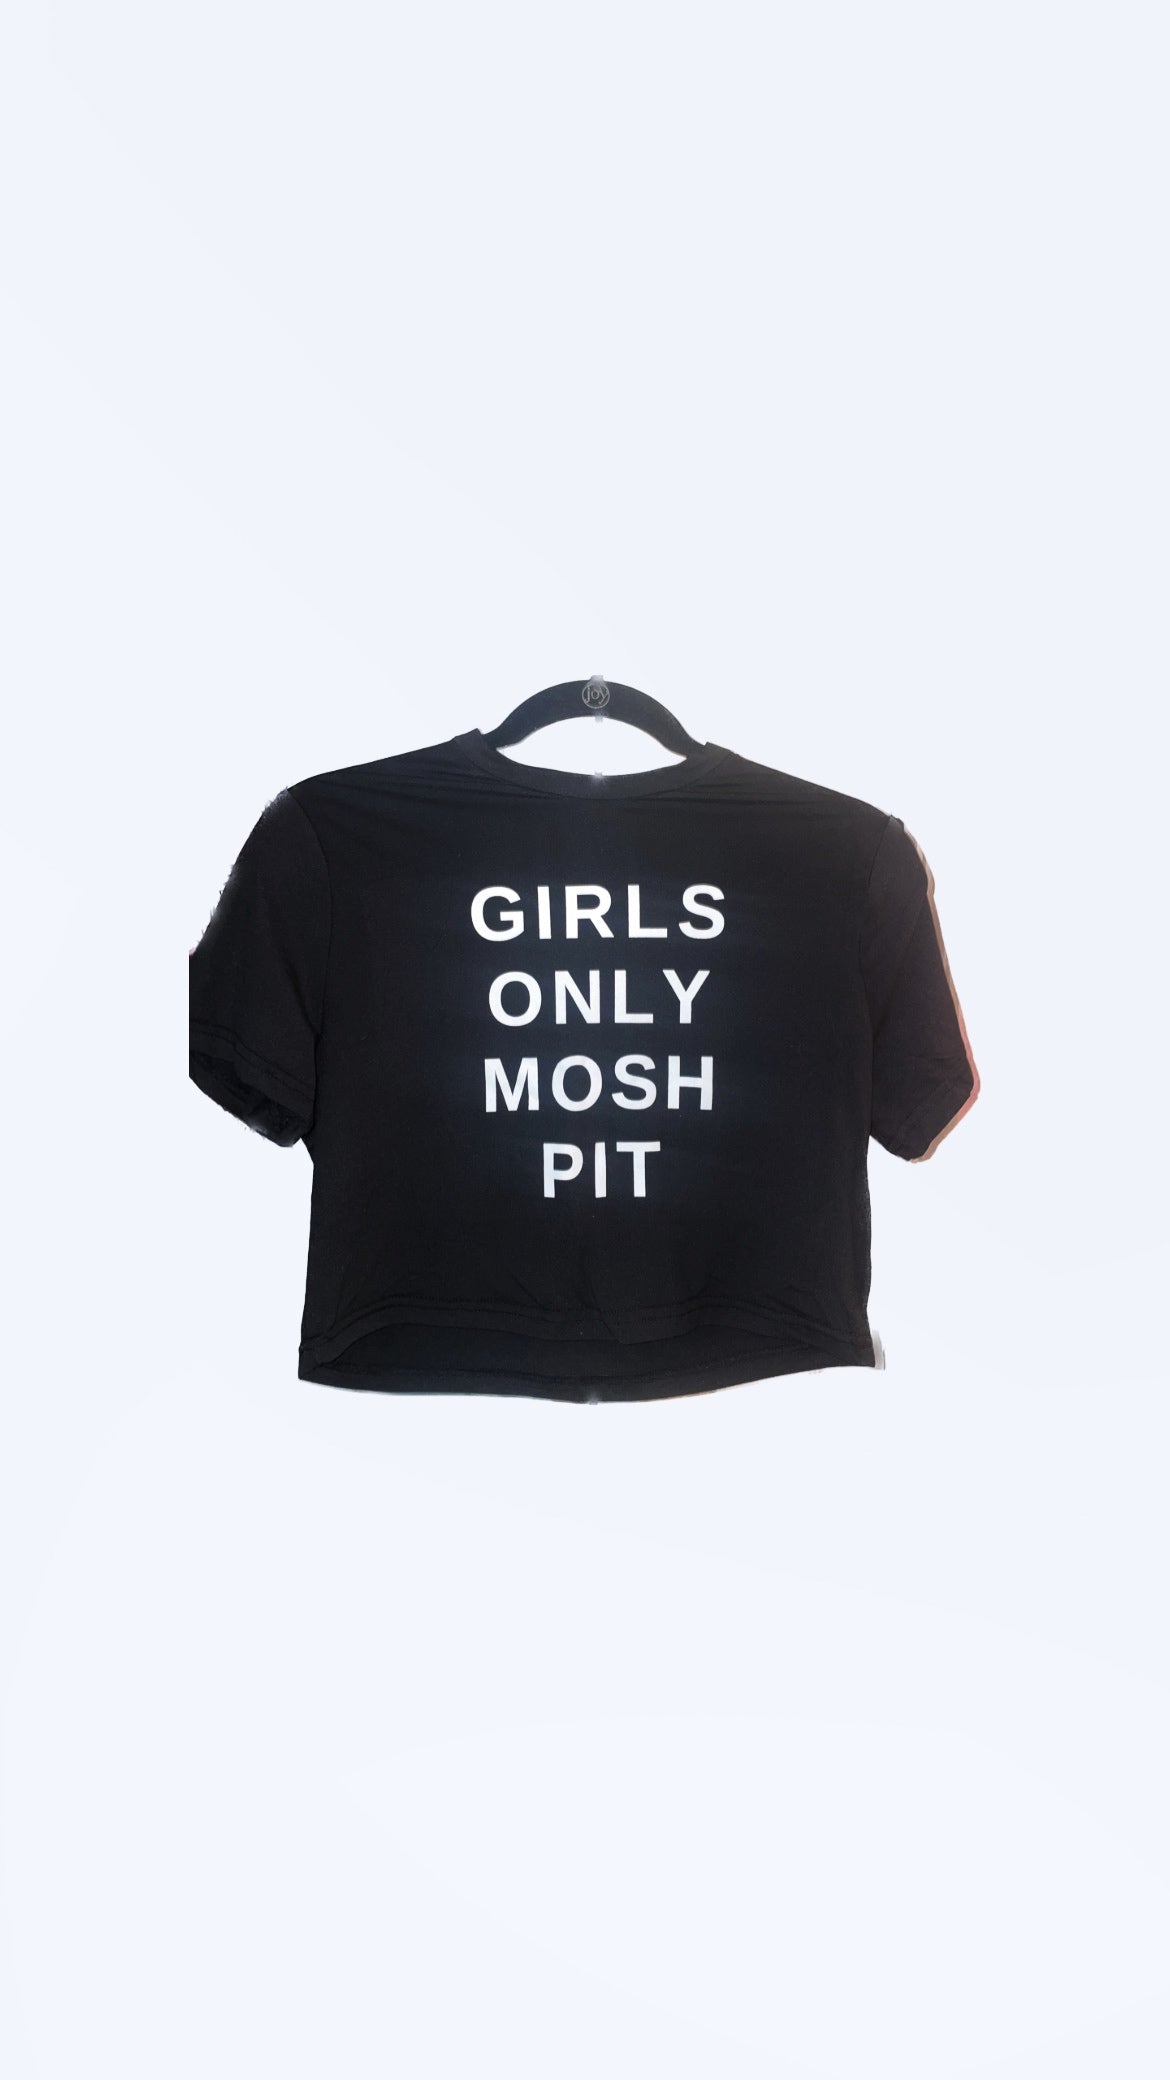 Girls Only Mosh Pit tee